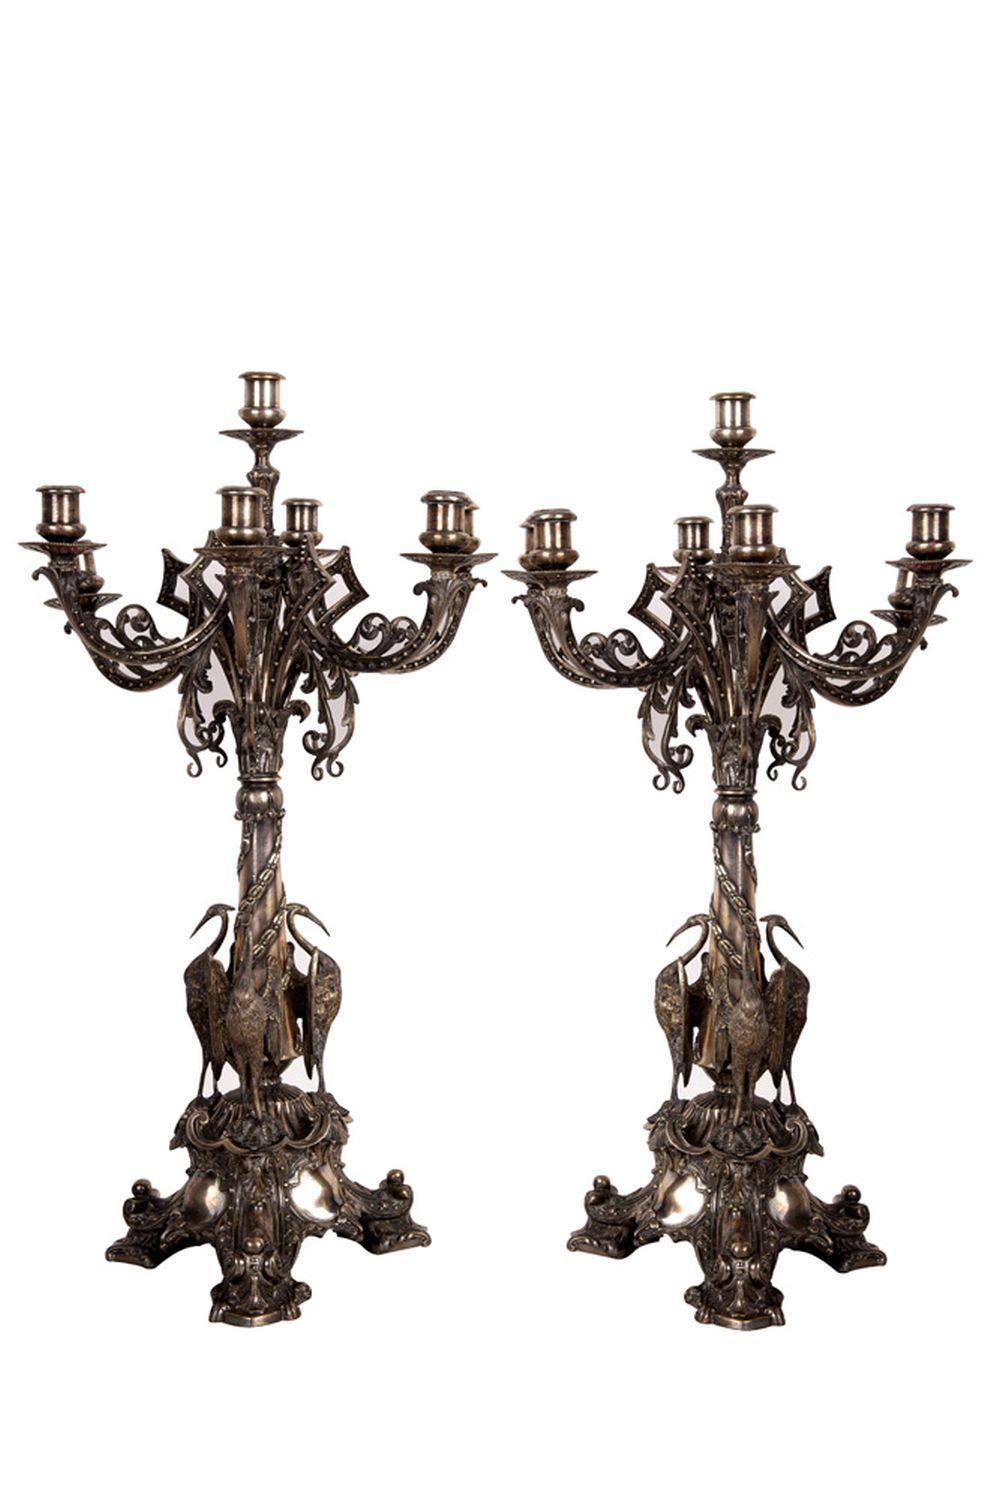 PAIR OF FRENCH SILVERED BRONZE 33595e